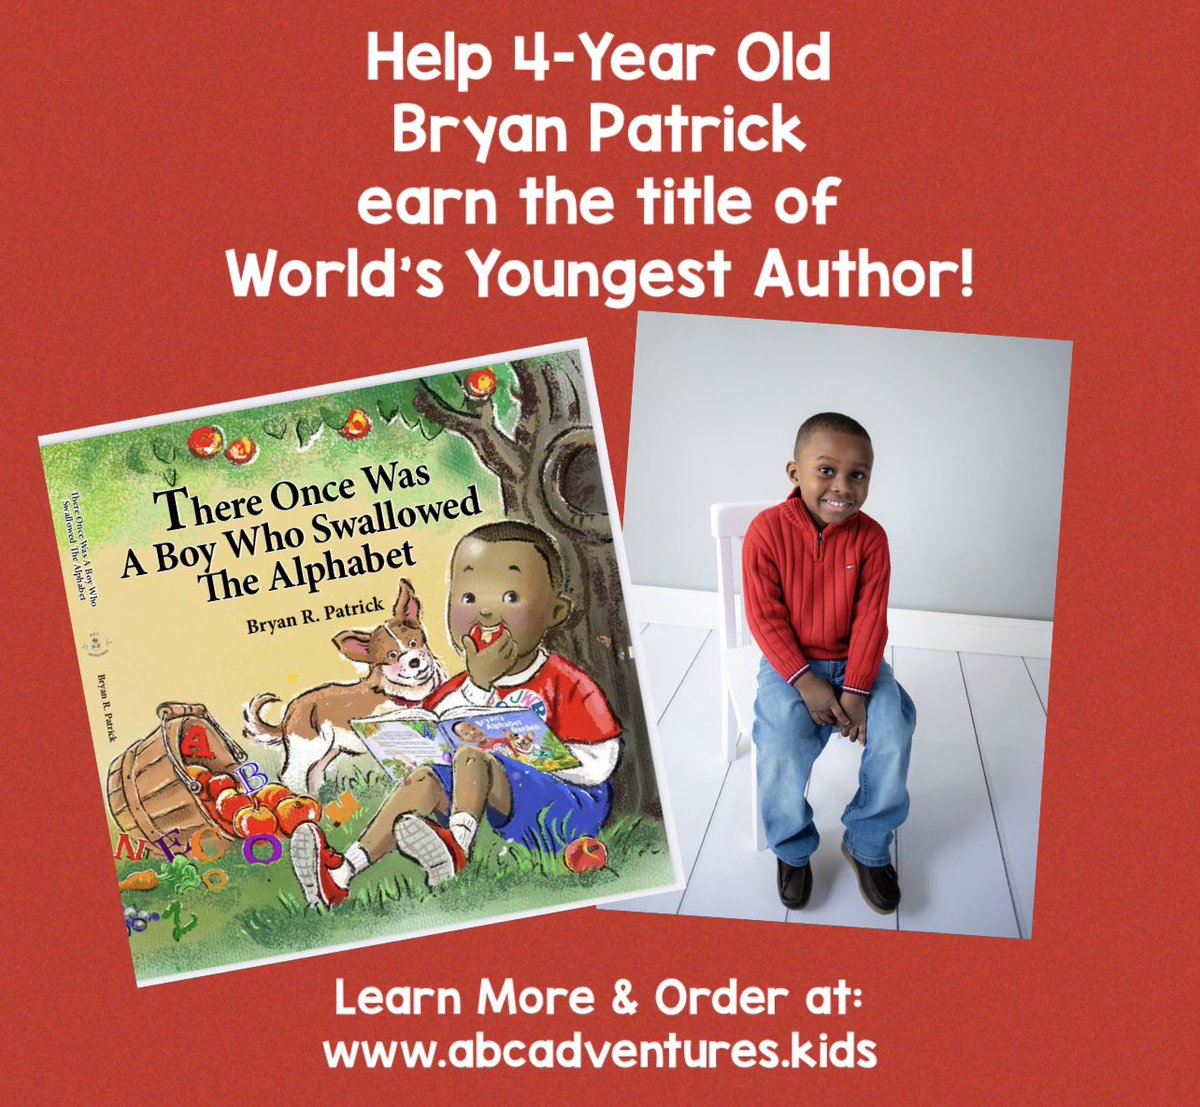 Help my little #Author achieve the #Title of being the #WorldsYoungestAuthor by purchasing his #Book! www.abcadventures.kids